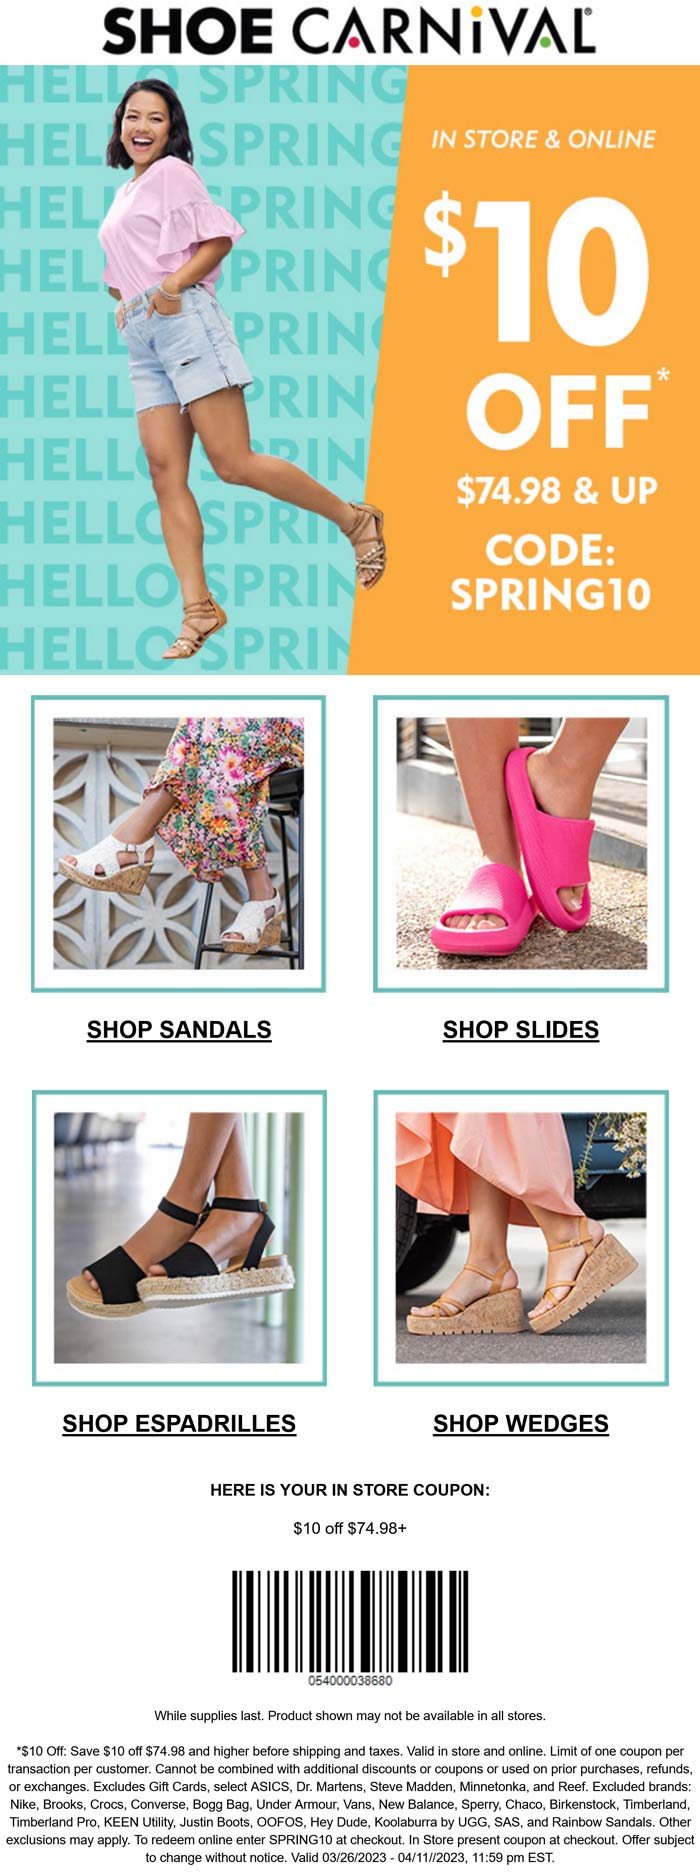 Shoe Carnival stores Coupon  $10 off $75 at Shoe Carnival, or online via promo code SPRING10 #shoecarnival 